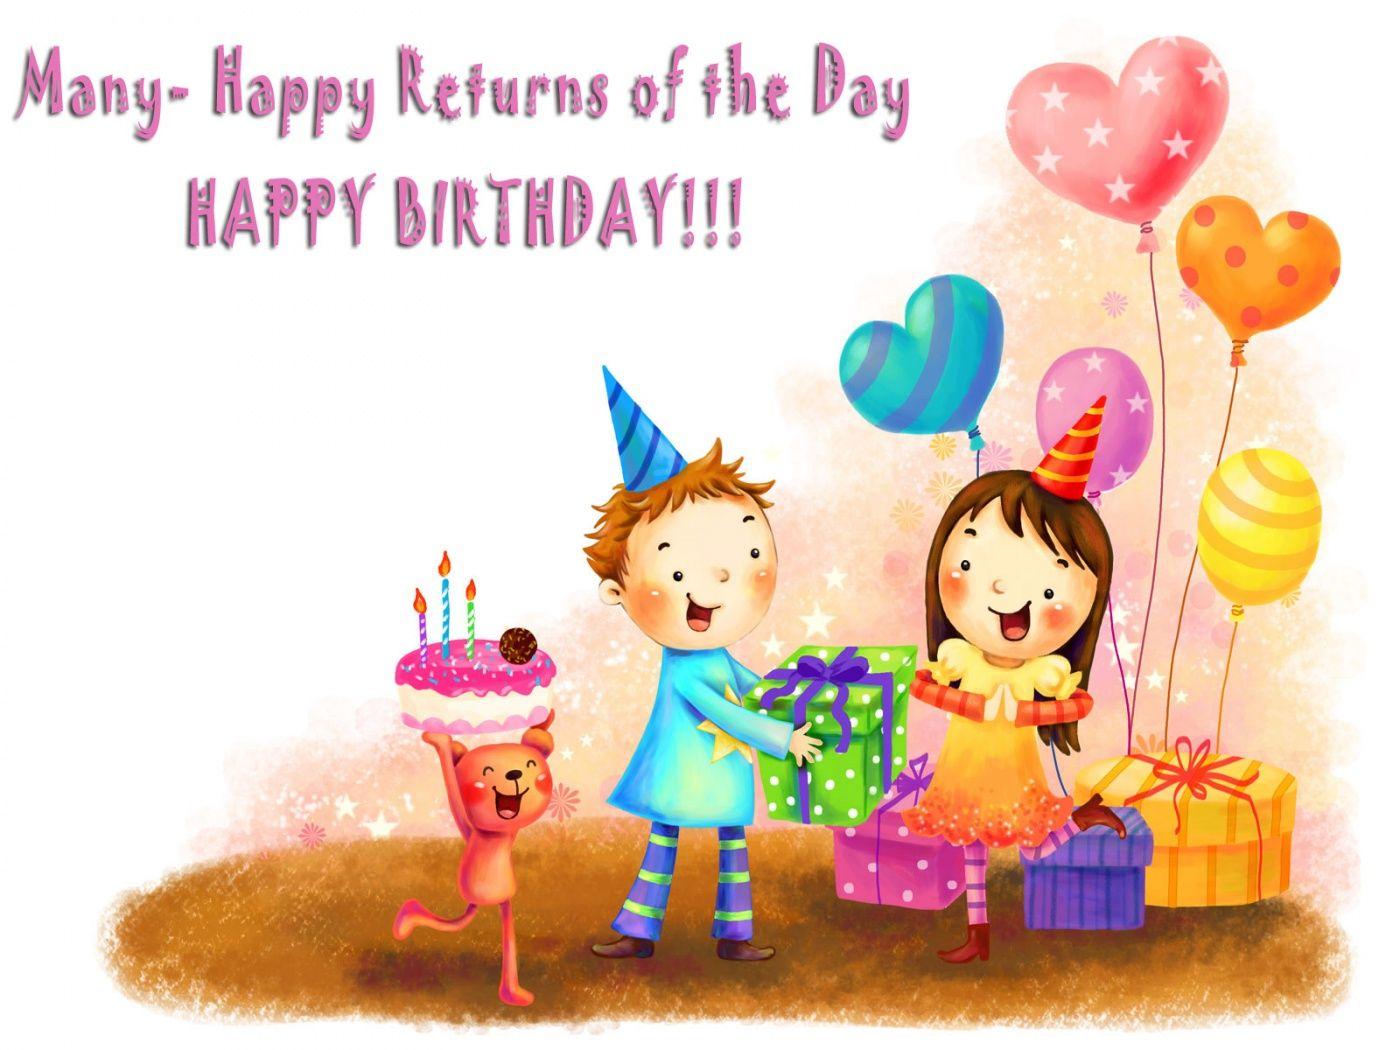 happy birthday sister greeting cards HD wishes wallpaper free Fine HD Wallpaper. Happy birthday wallpaper, Birthday wishes for kids, Birthday wishes and image